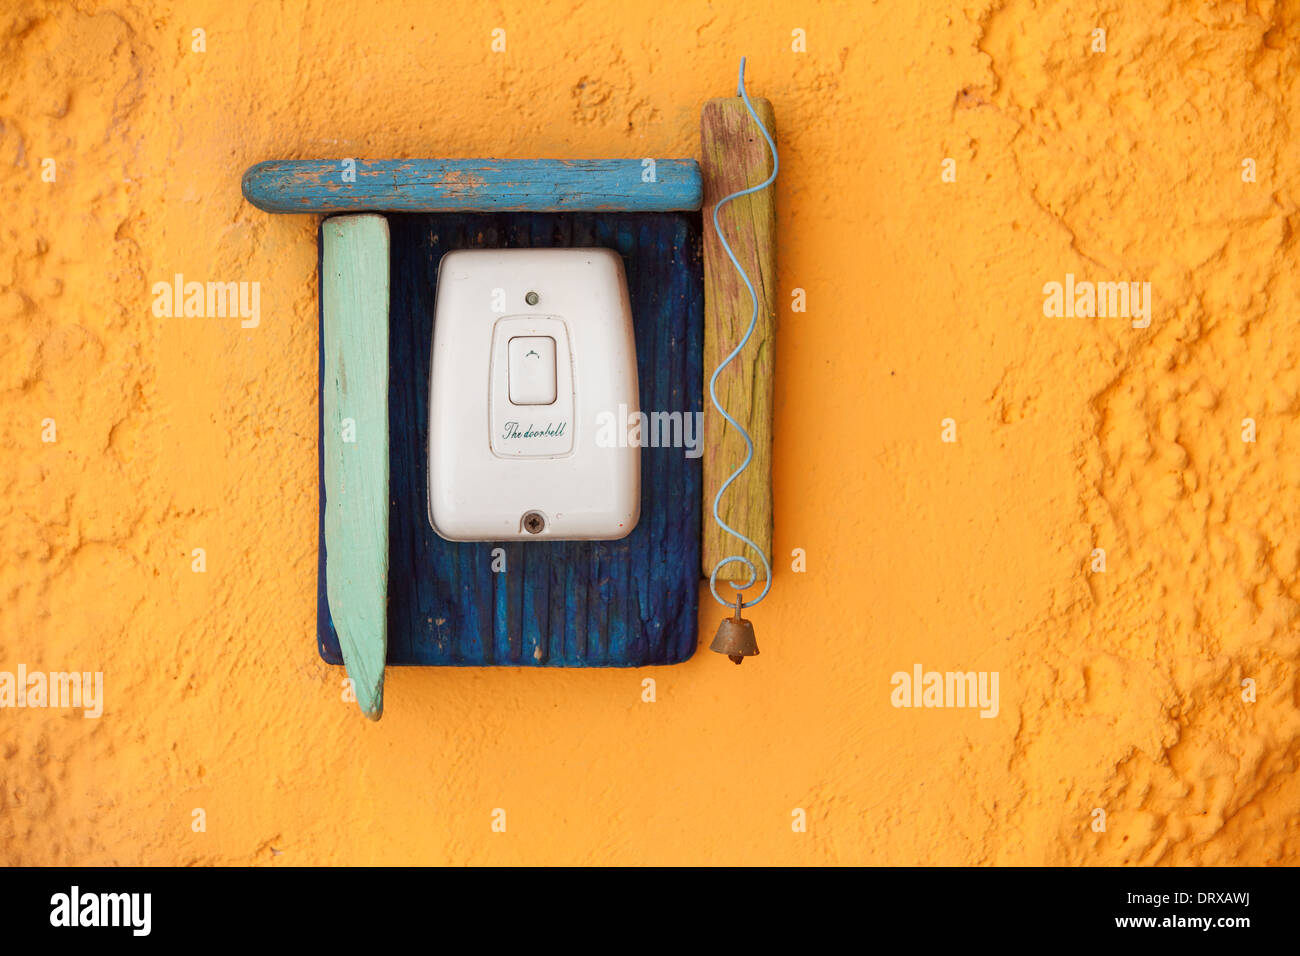 The doorbell button with wooden decoration on the old yellow wall. Stock Photo